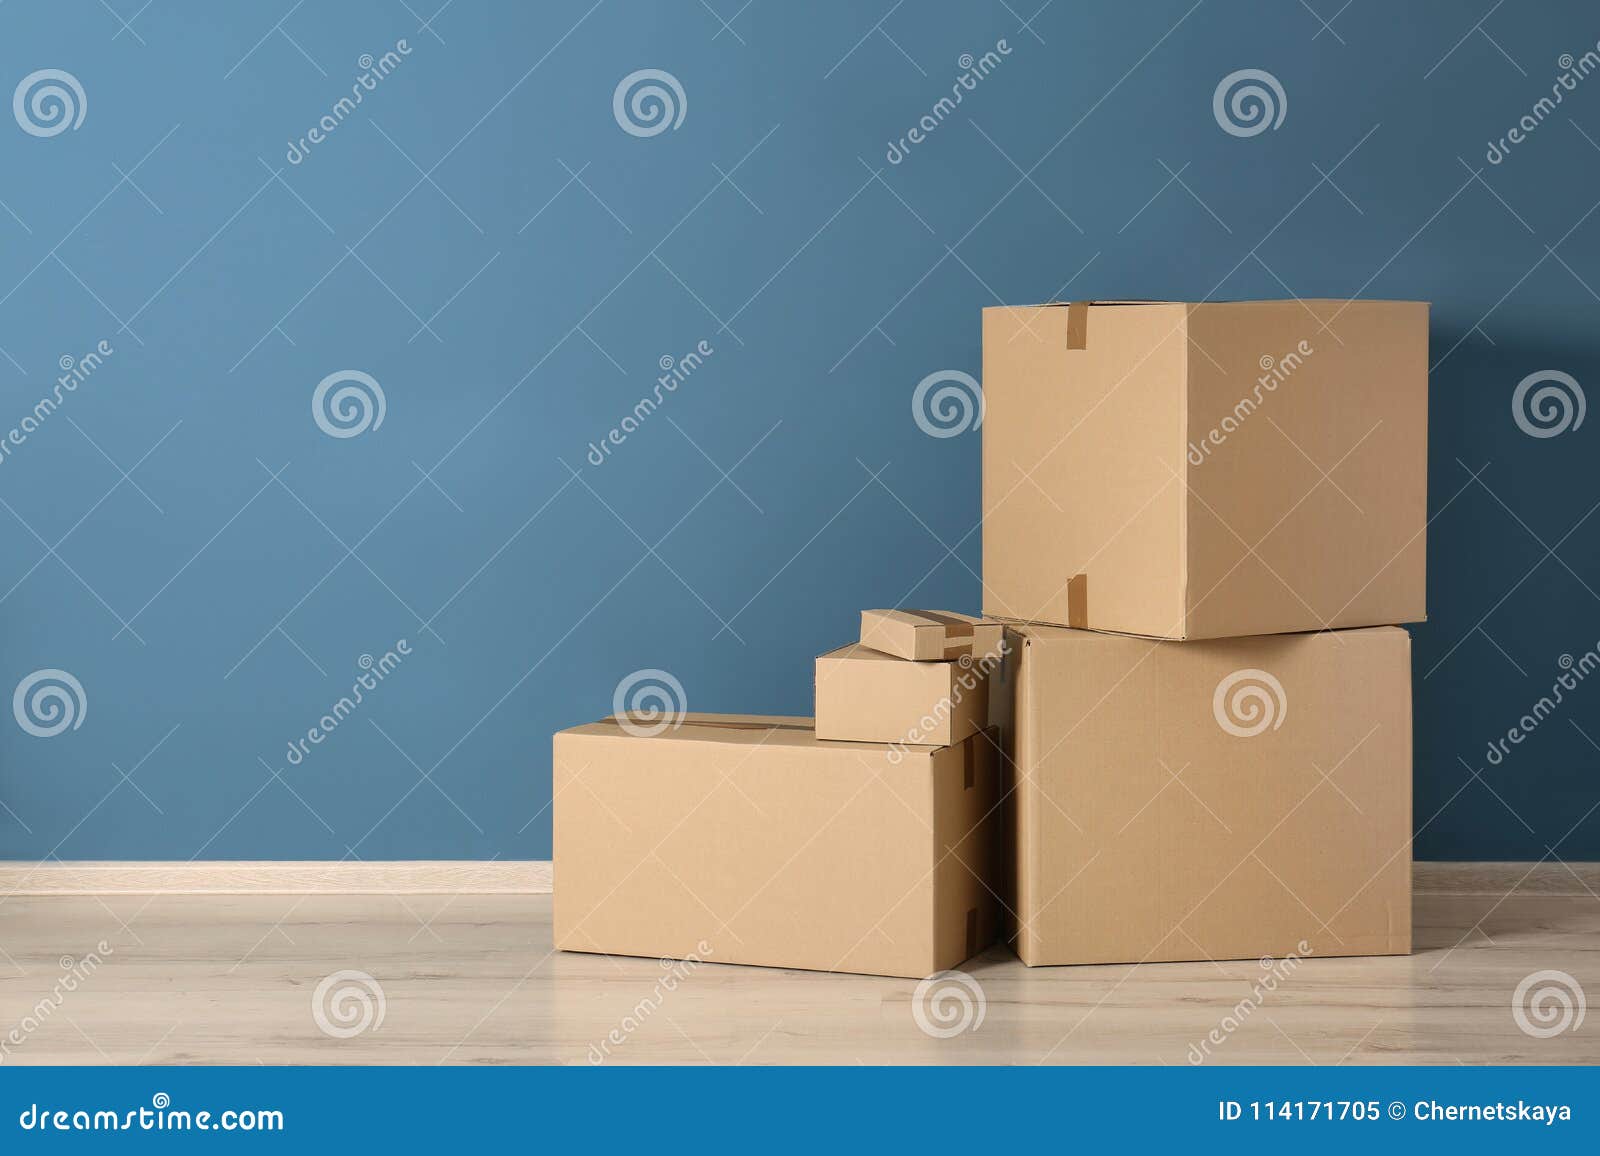 Cardboard boxes near wall stock image. Image of post - 114171705